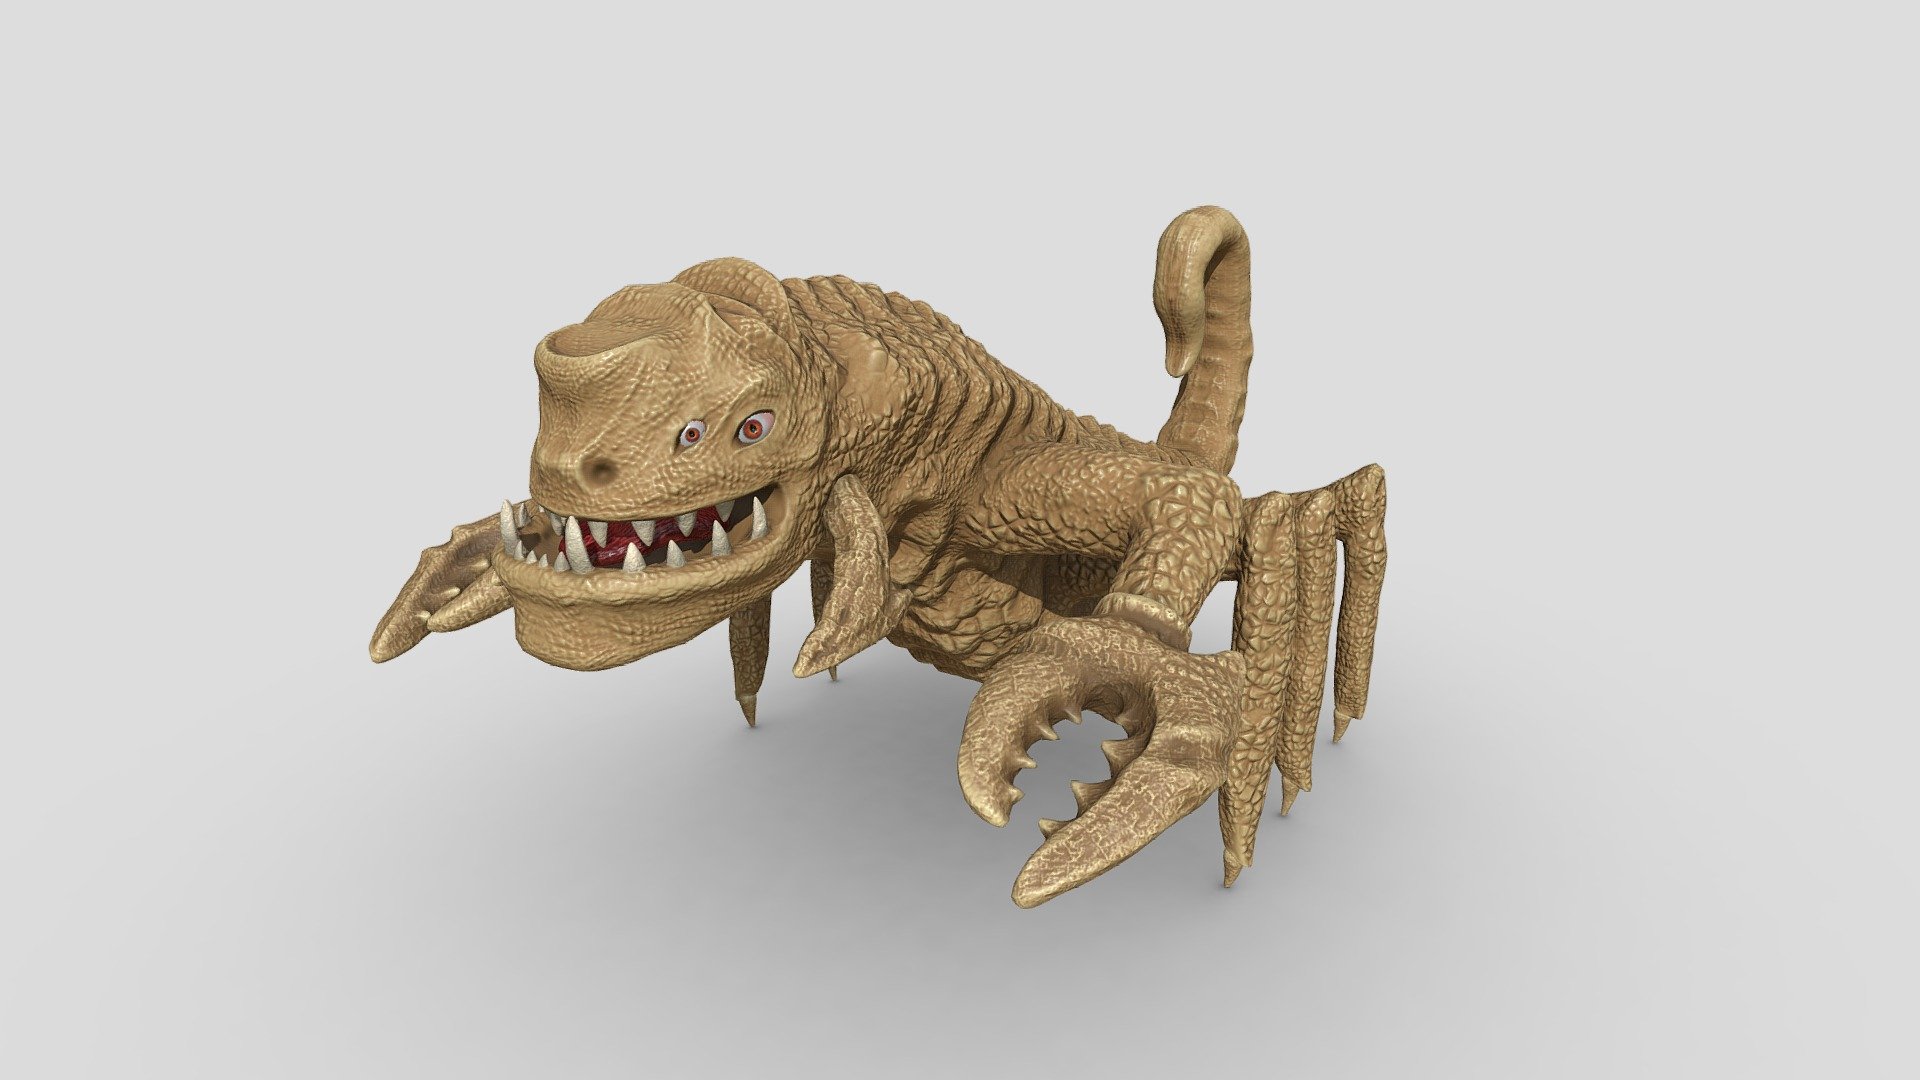 just a creature that I made according to the mood from the concept.
83,912 polygons, made in blender - Sand Scorpio - 3D model by Horizzon 3d model